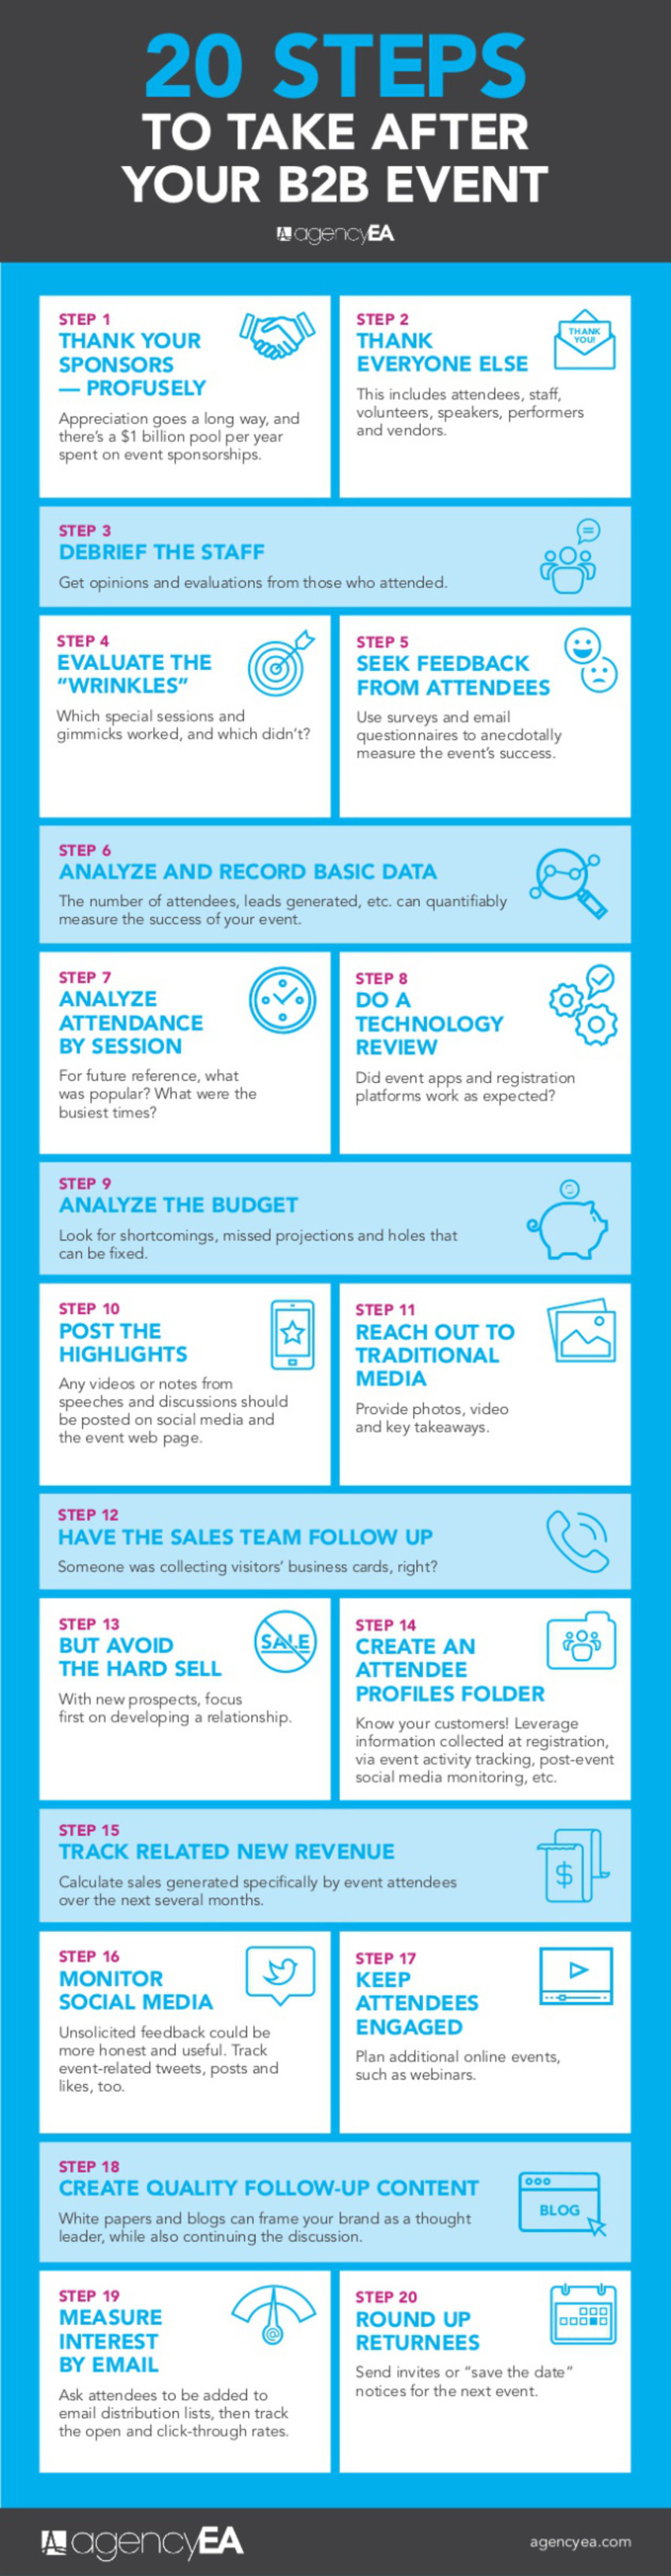 20 Steps to Take After Your B2B Event to Ensure Future Success [Infographic] - MarketingProfs | The MarTech Digest | Scoop.it